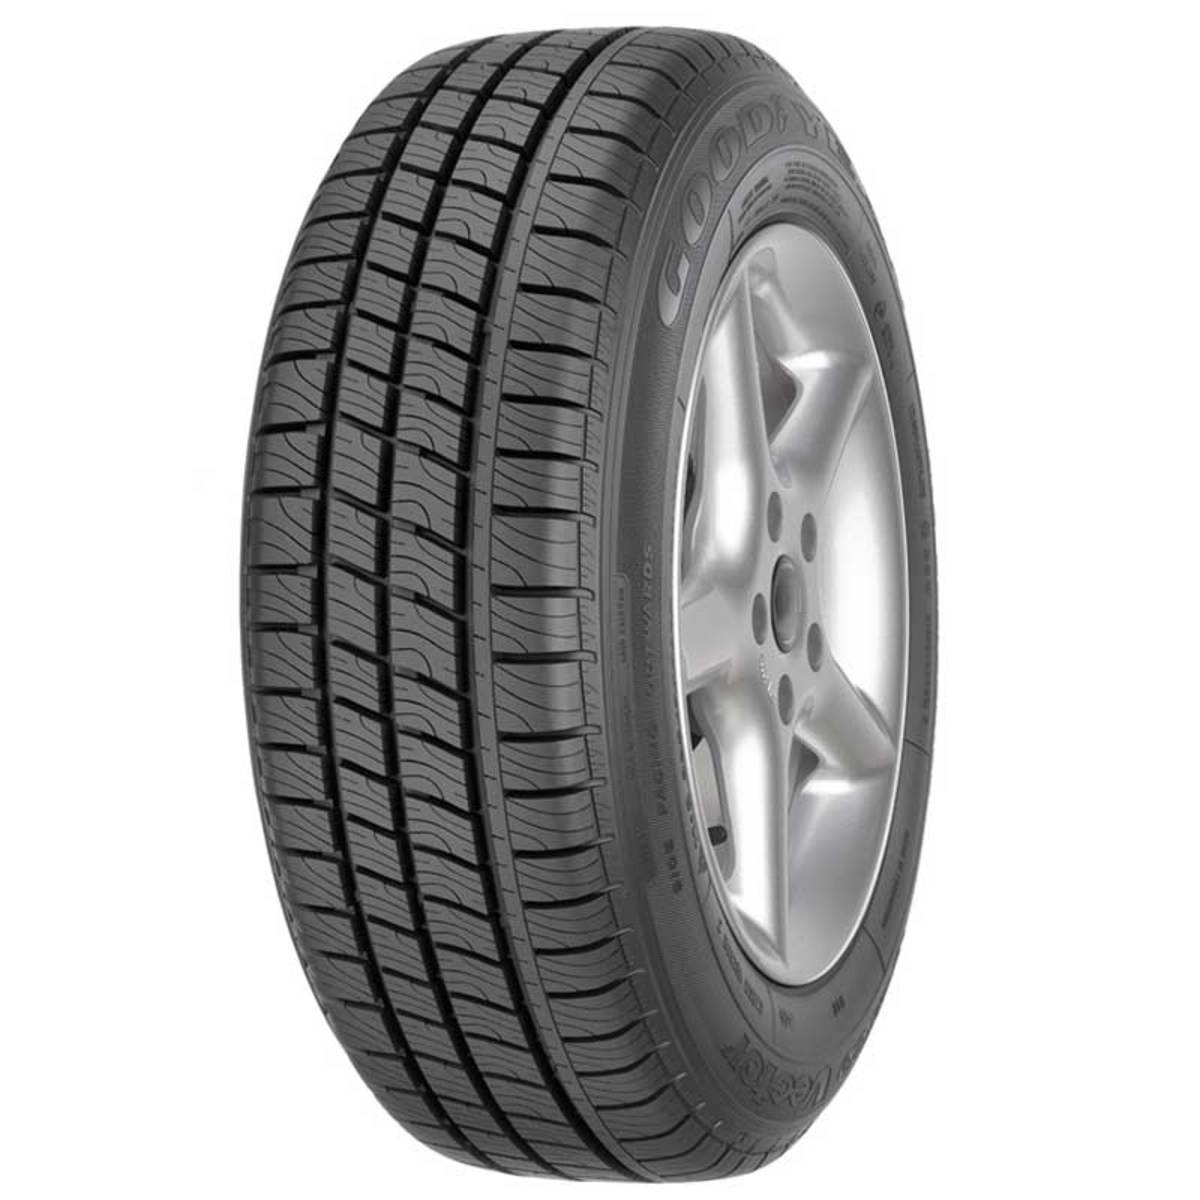 Goodyear 215/60 R17 (109T/104H) CARGO VECTOR 2 MS